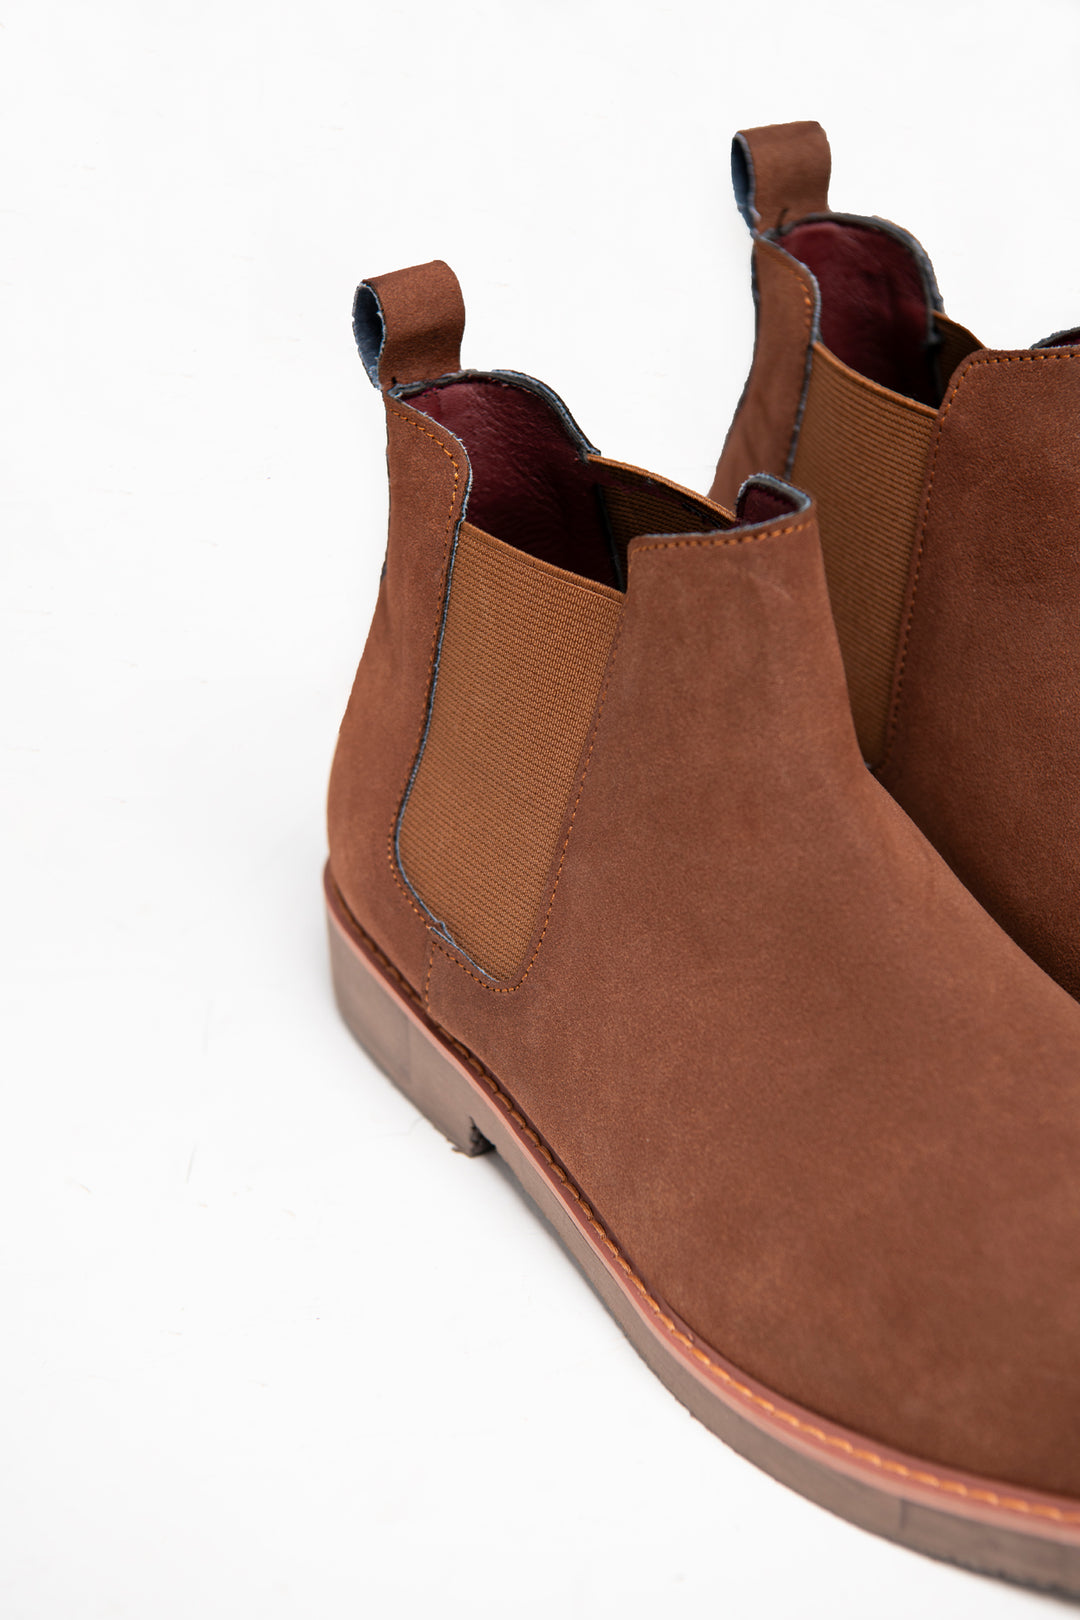 CLASSIC BROWN CHELSEA BOOTS